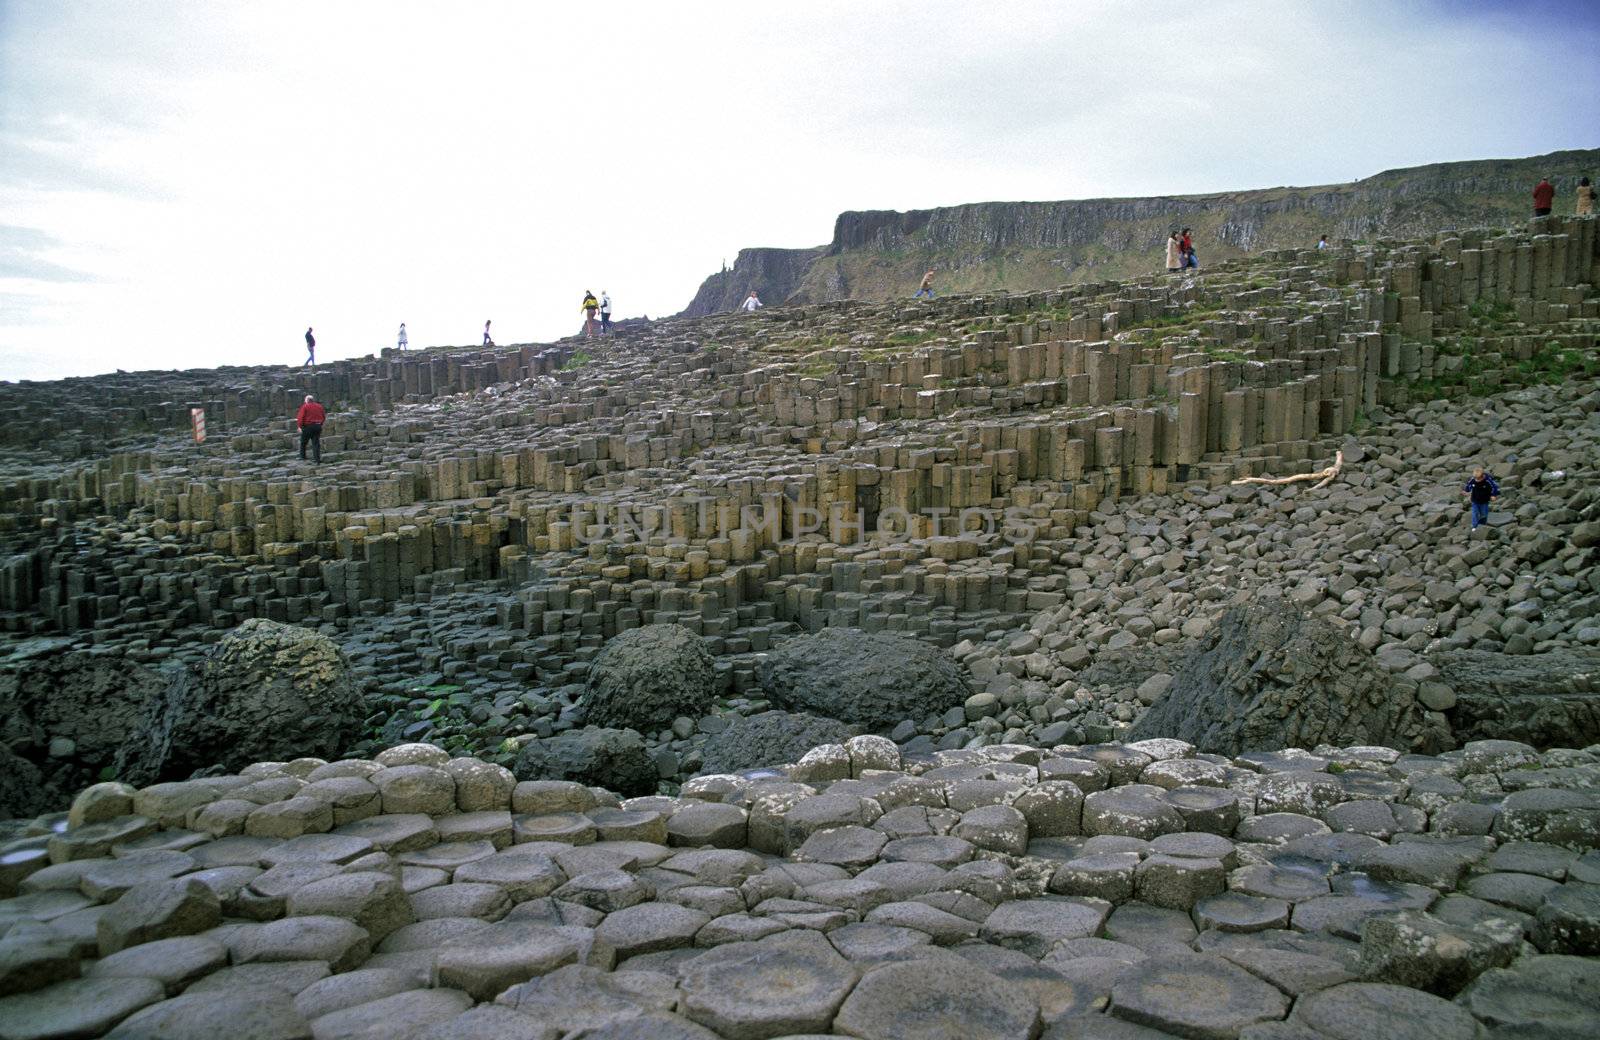 Tourists climb over the Giant's Causeway, one of the natural wonders of the world and Ireland's biggest tourist attraction